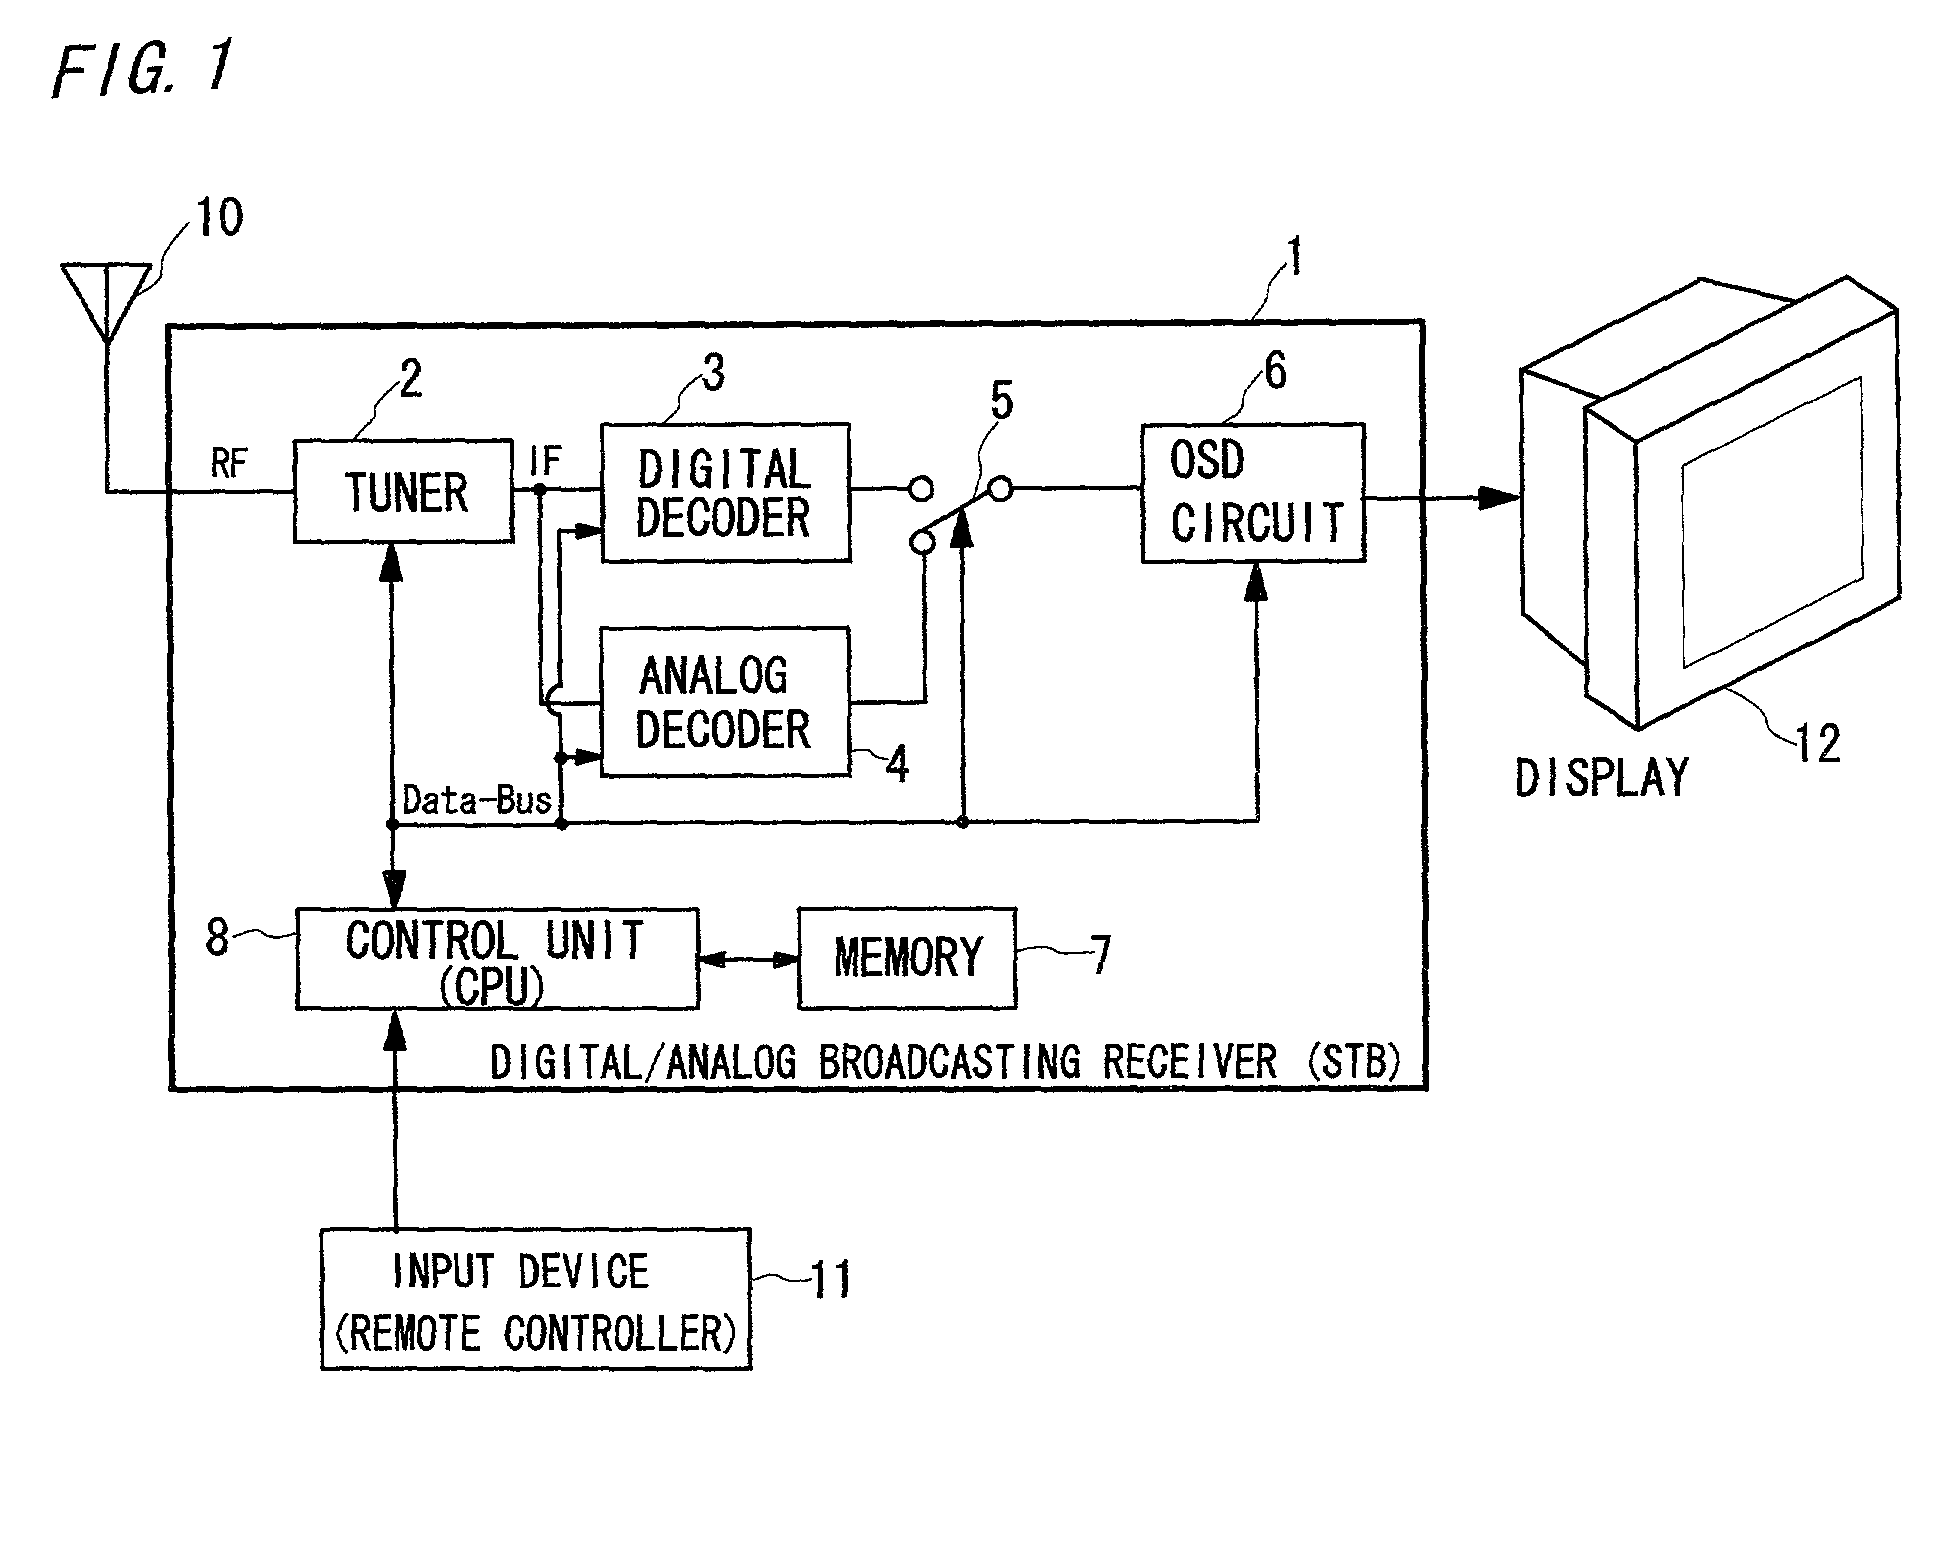 Broadcast receiving system with function of on-screen displaying channel information